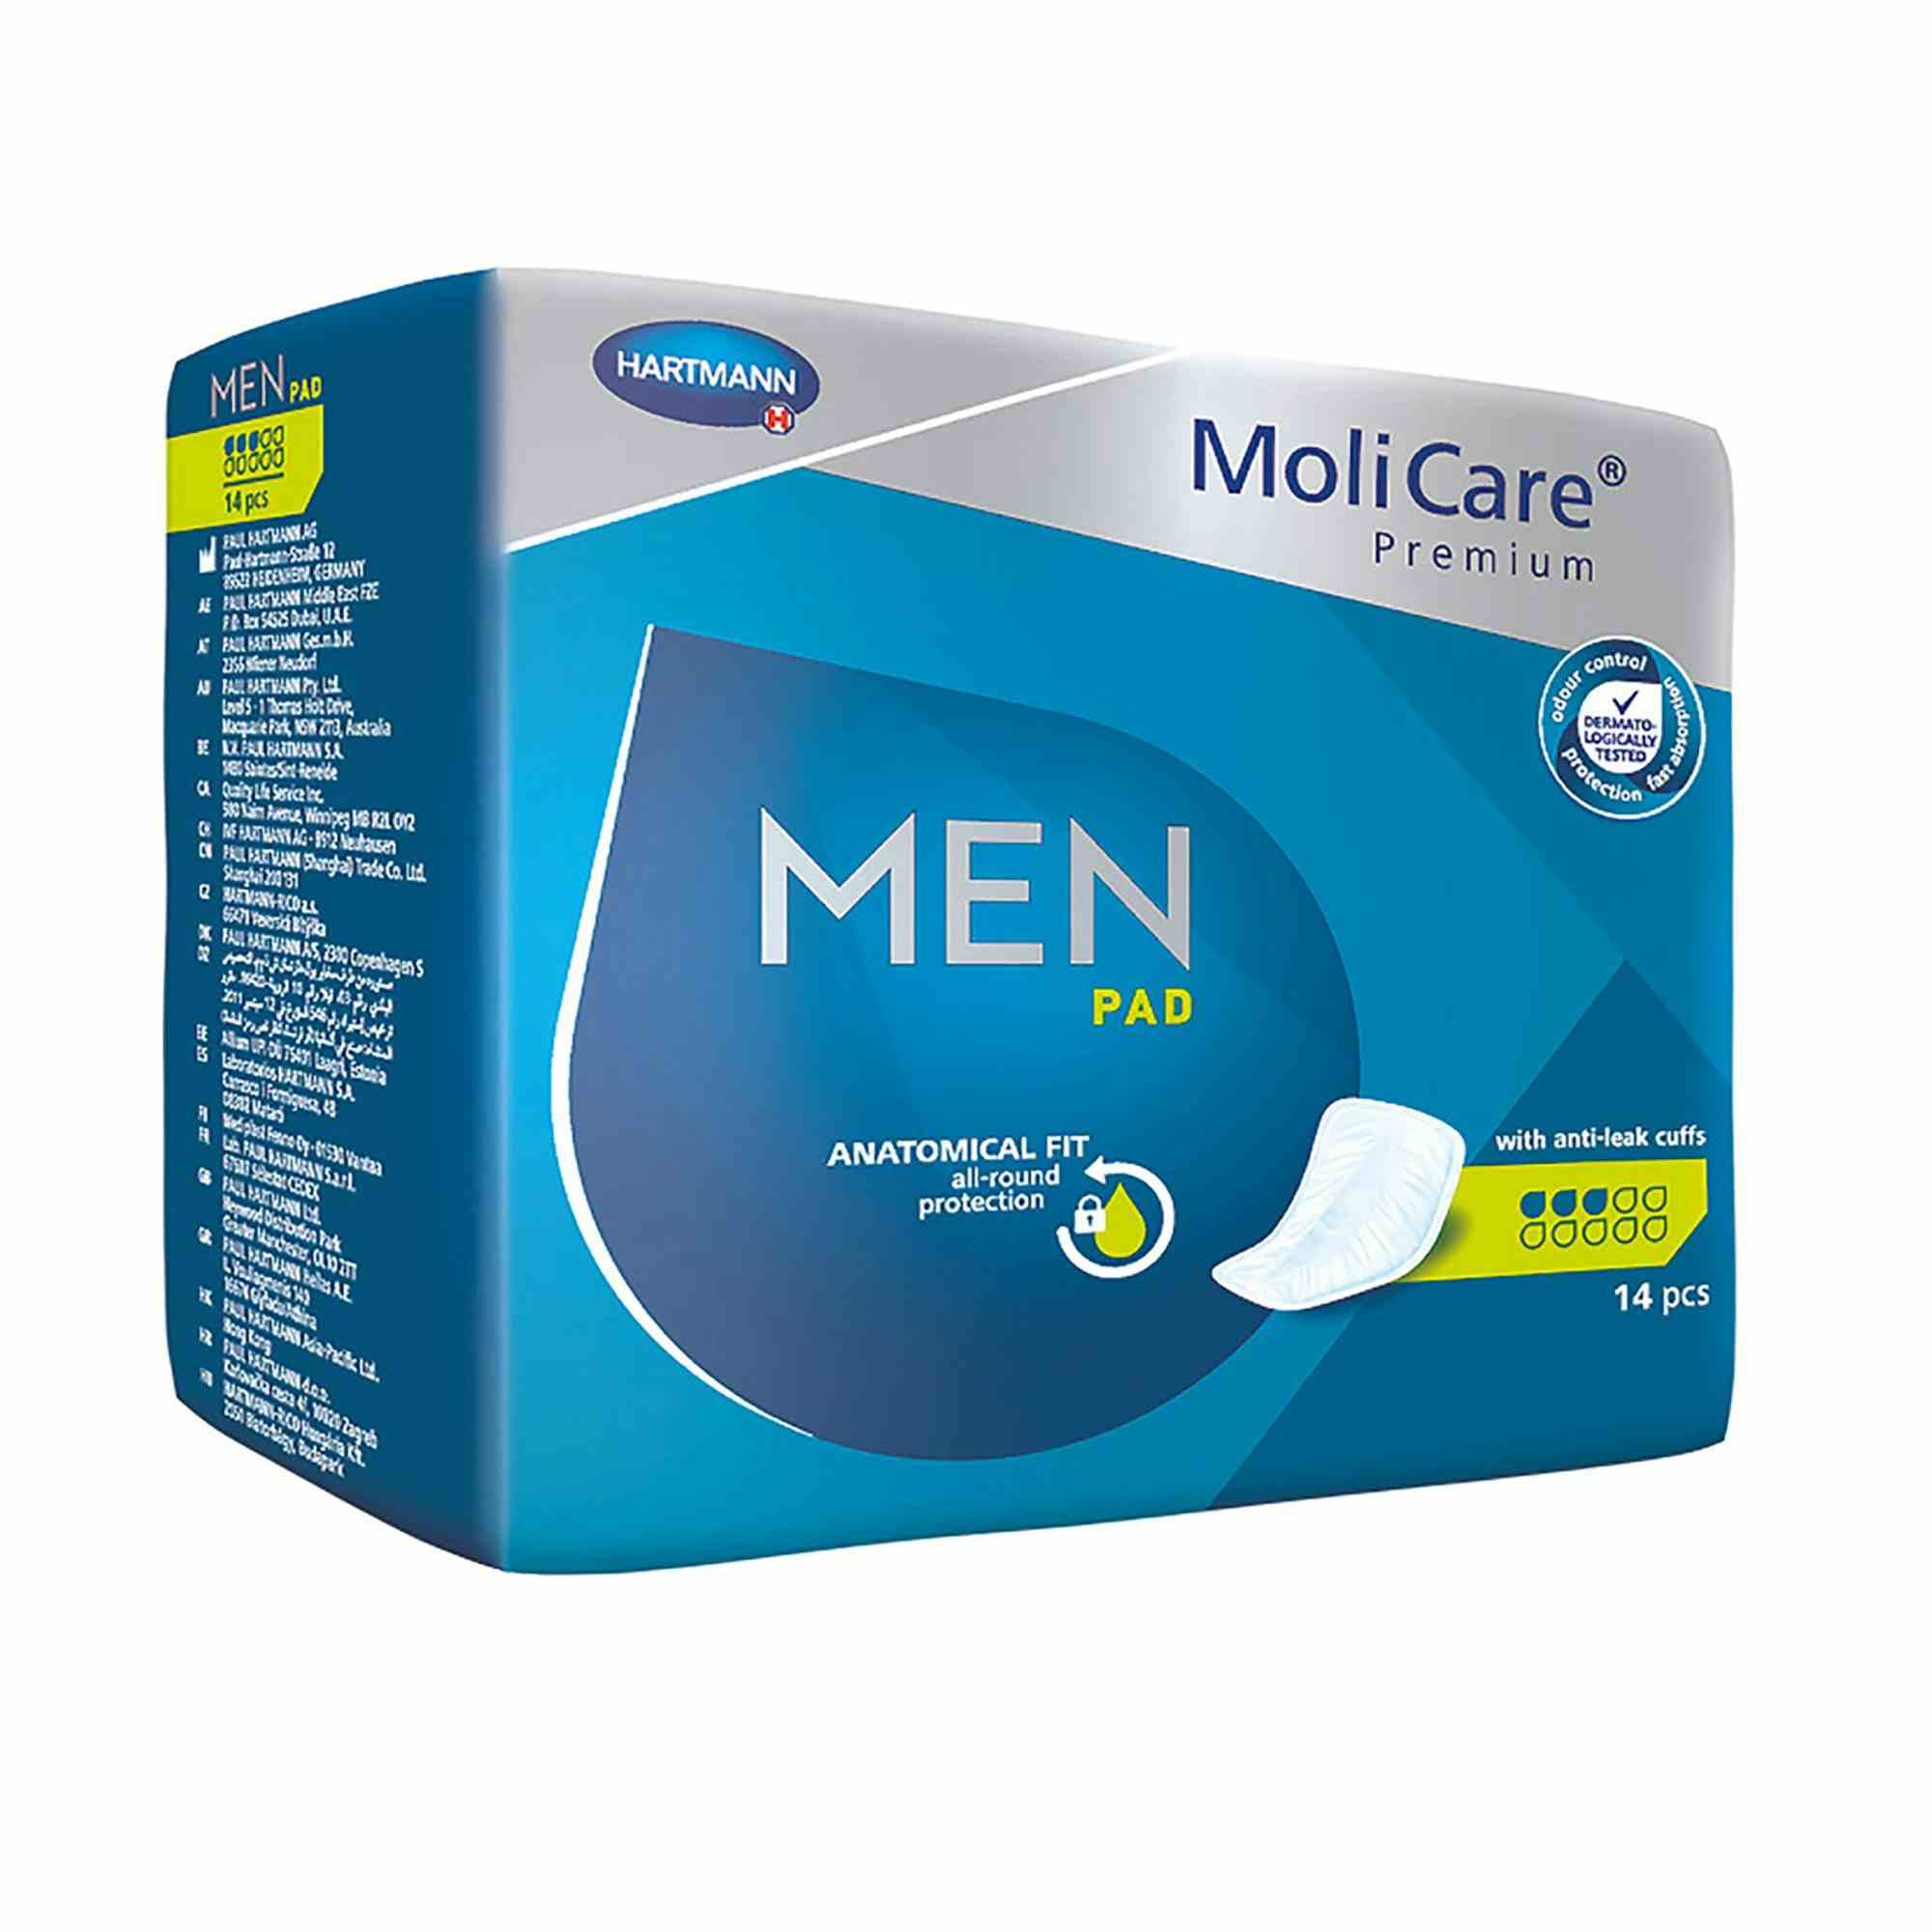 MoliCare Premium Men's Bladder Control Pad, Light Absorbency, 168603, One Size Fits Most - Case of 112 (8 Bags)